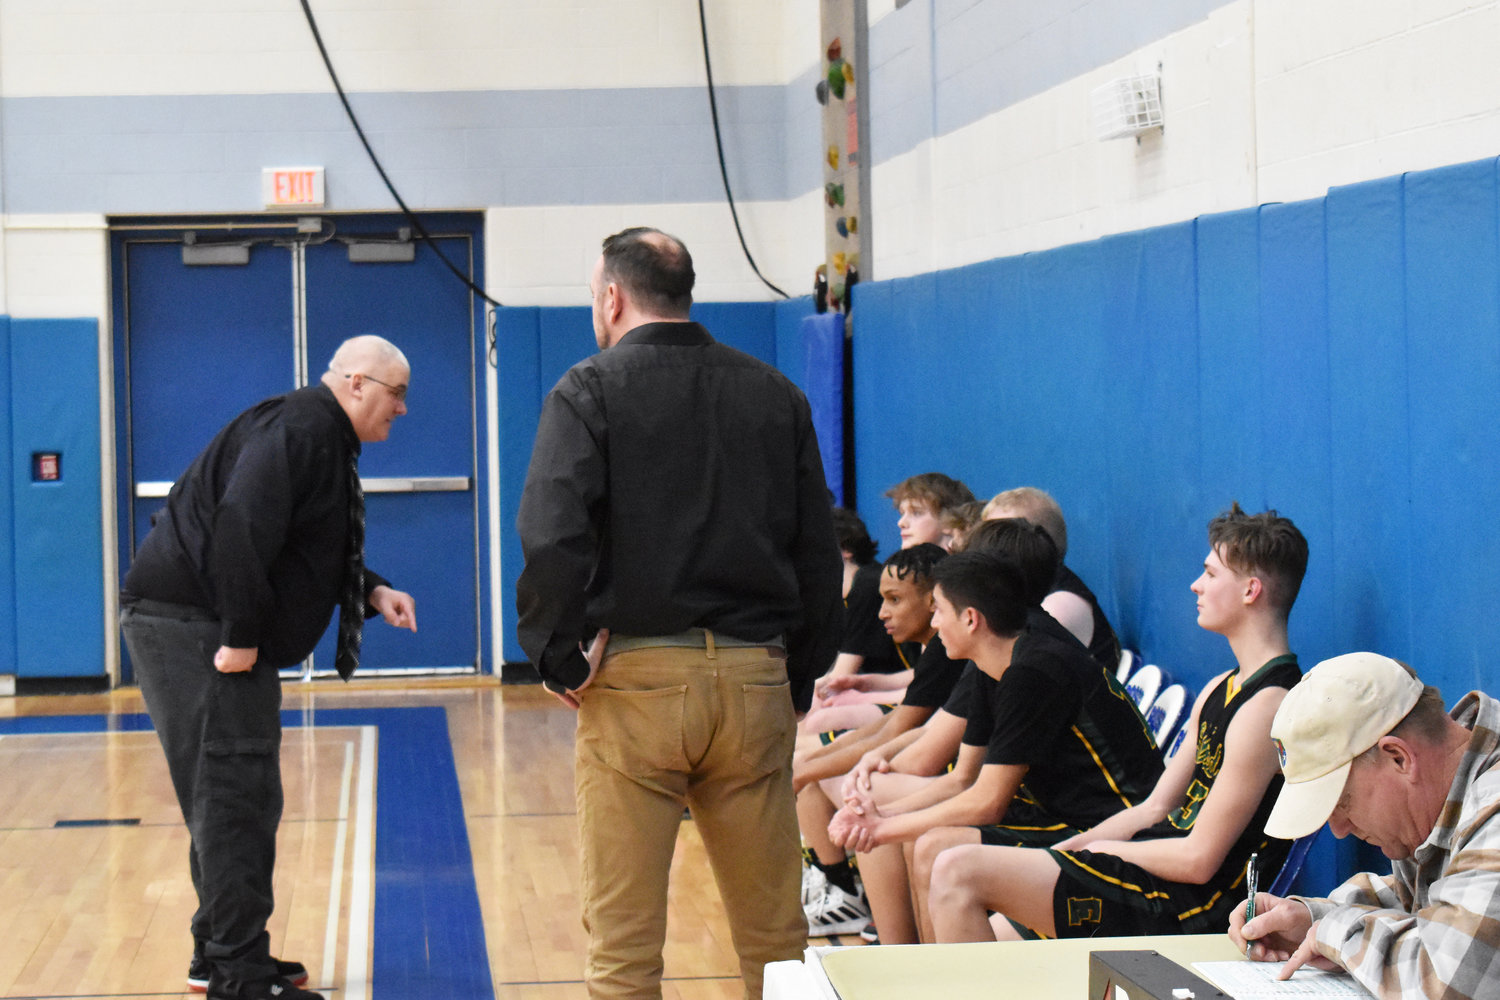 Coach Furler addresses his team after their Sectional tournament loss to Roscoe, explaining to them how successful their season was and urging them not to hang their heads.